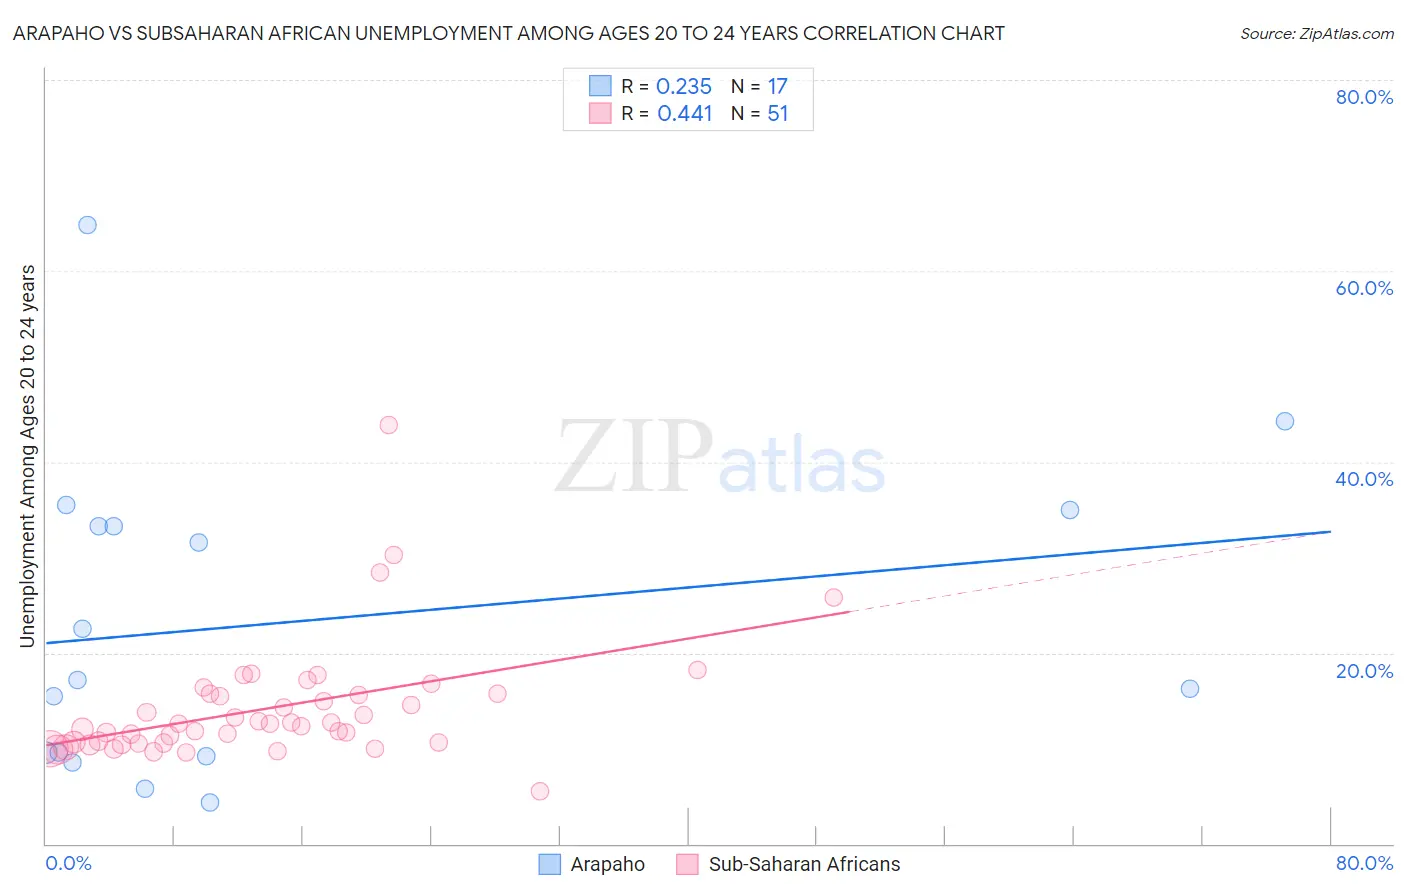 Arapaho vs Subsaharan African Unemployment Among Ages 20 to 24 years